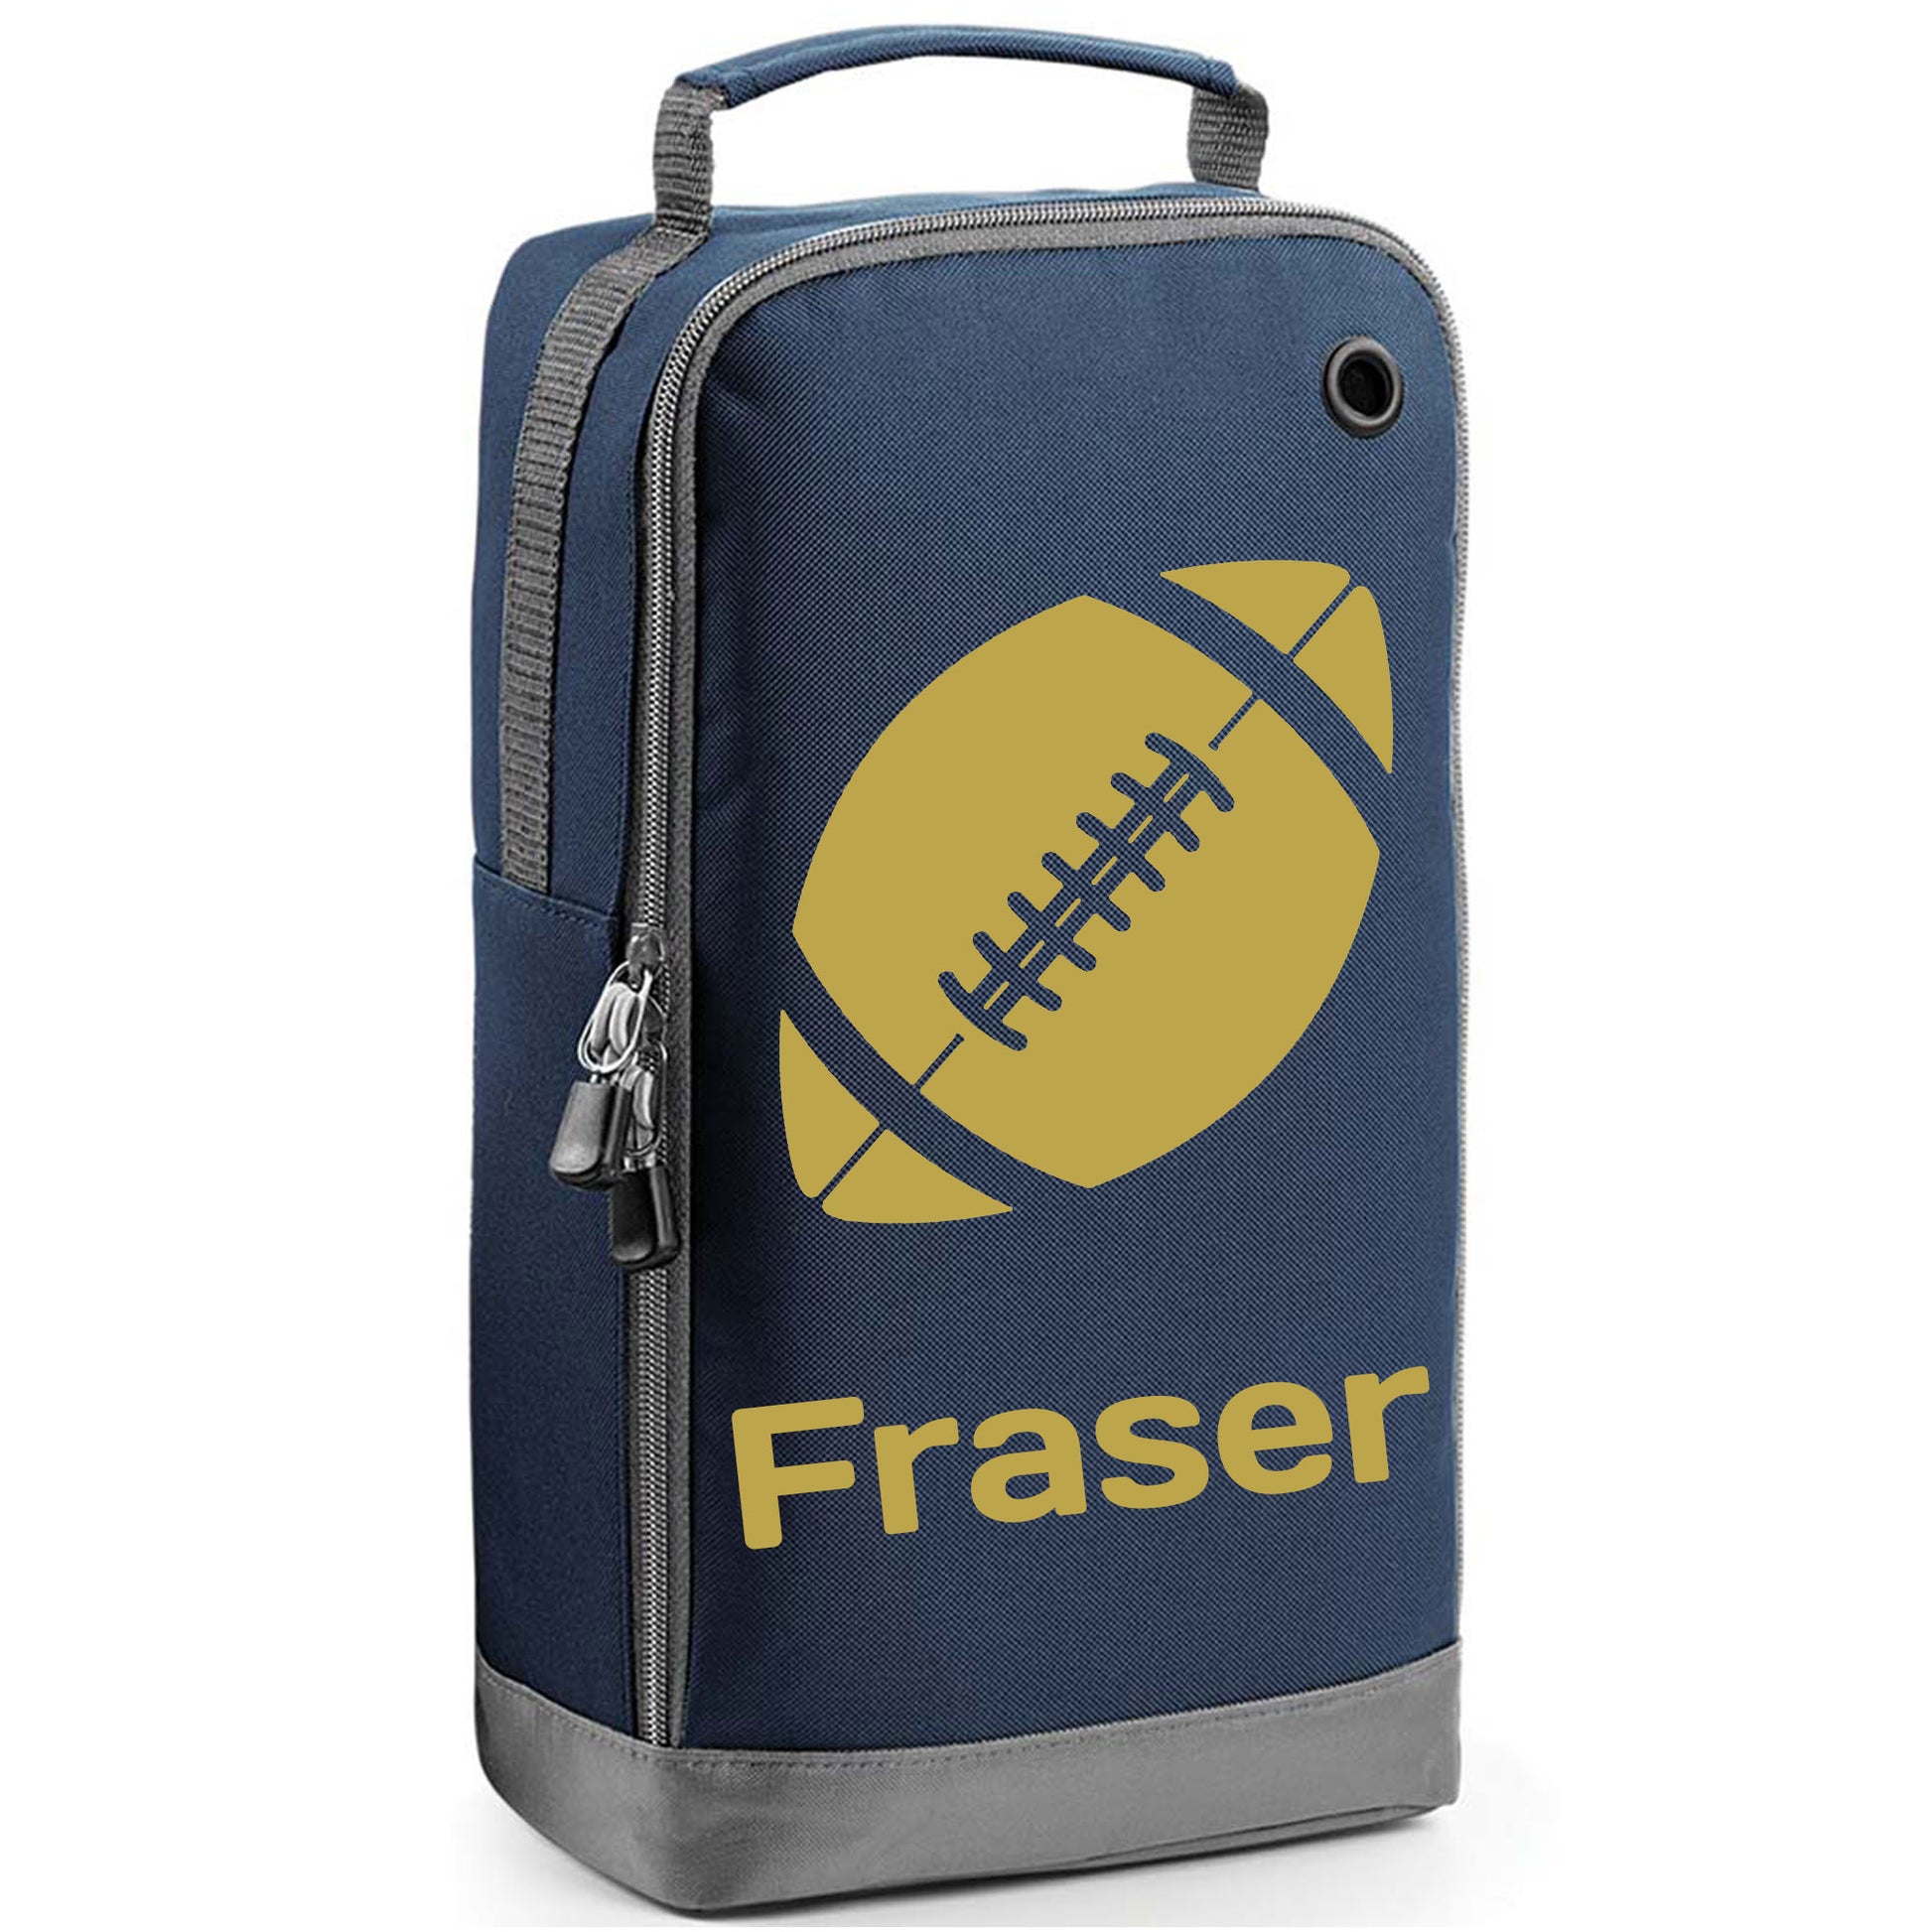 Personalised Rugby/ American Football Boot Bag with Design & Name  - Always Looking Good - Navy  